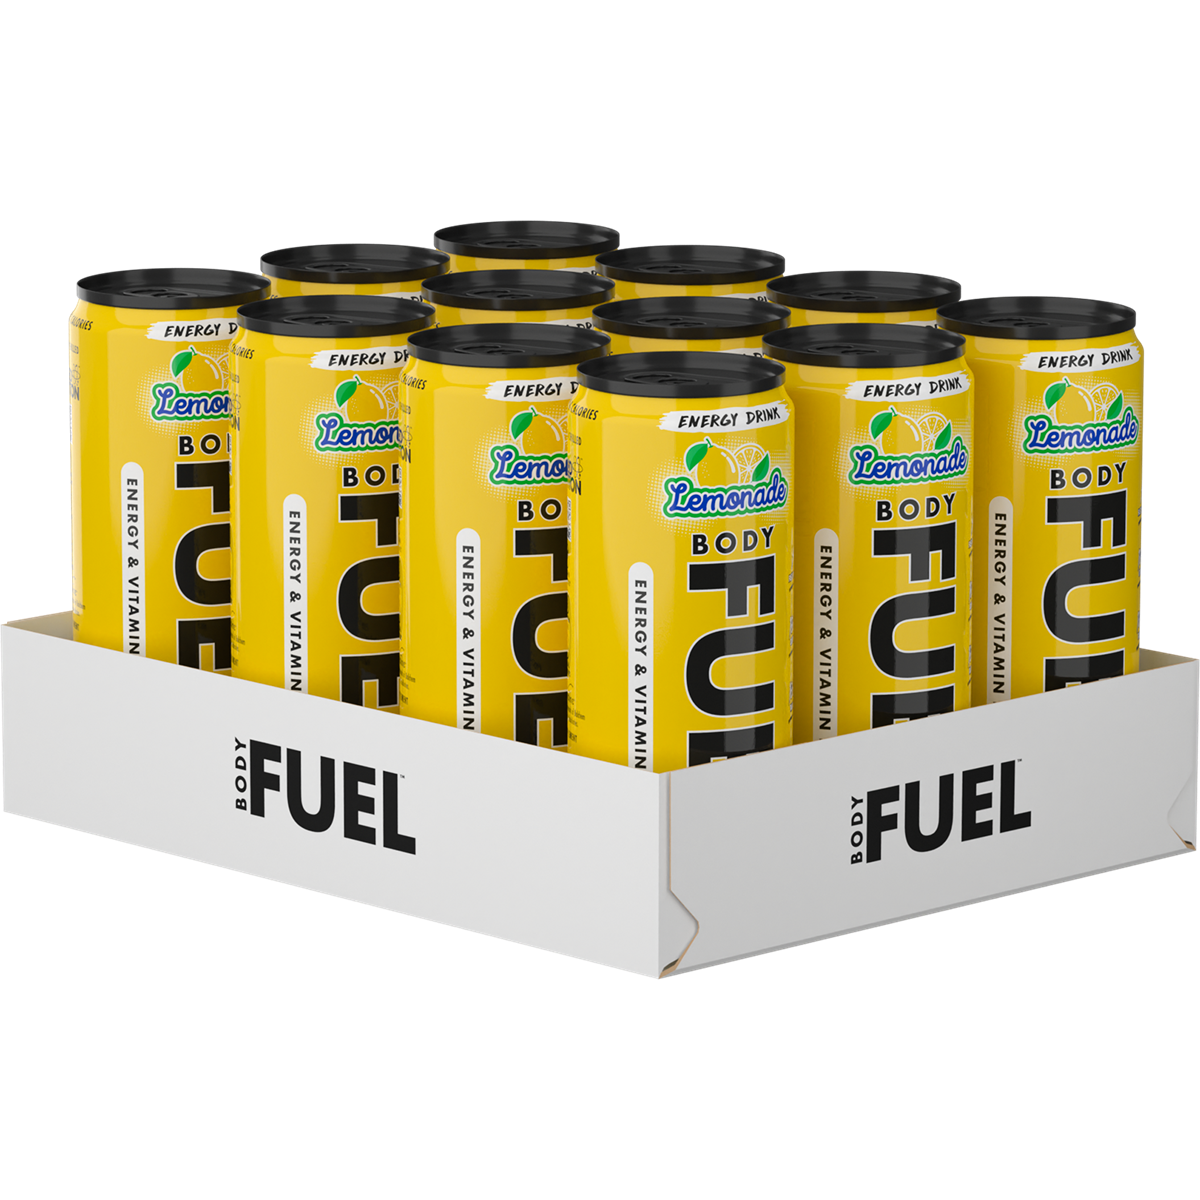 Applied Nutrition Body Fuel Energy Can 12 x 330ml